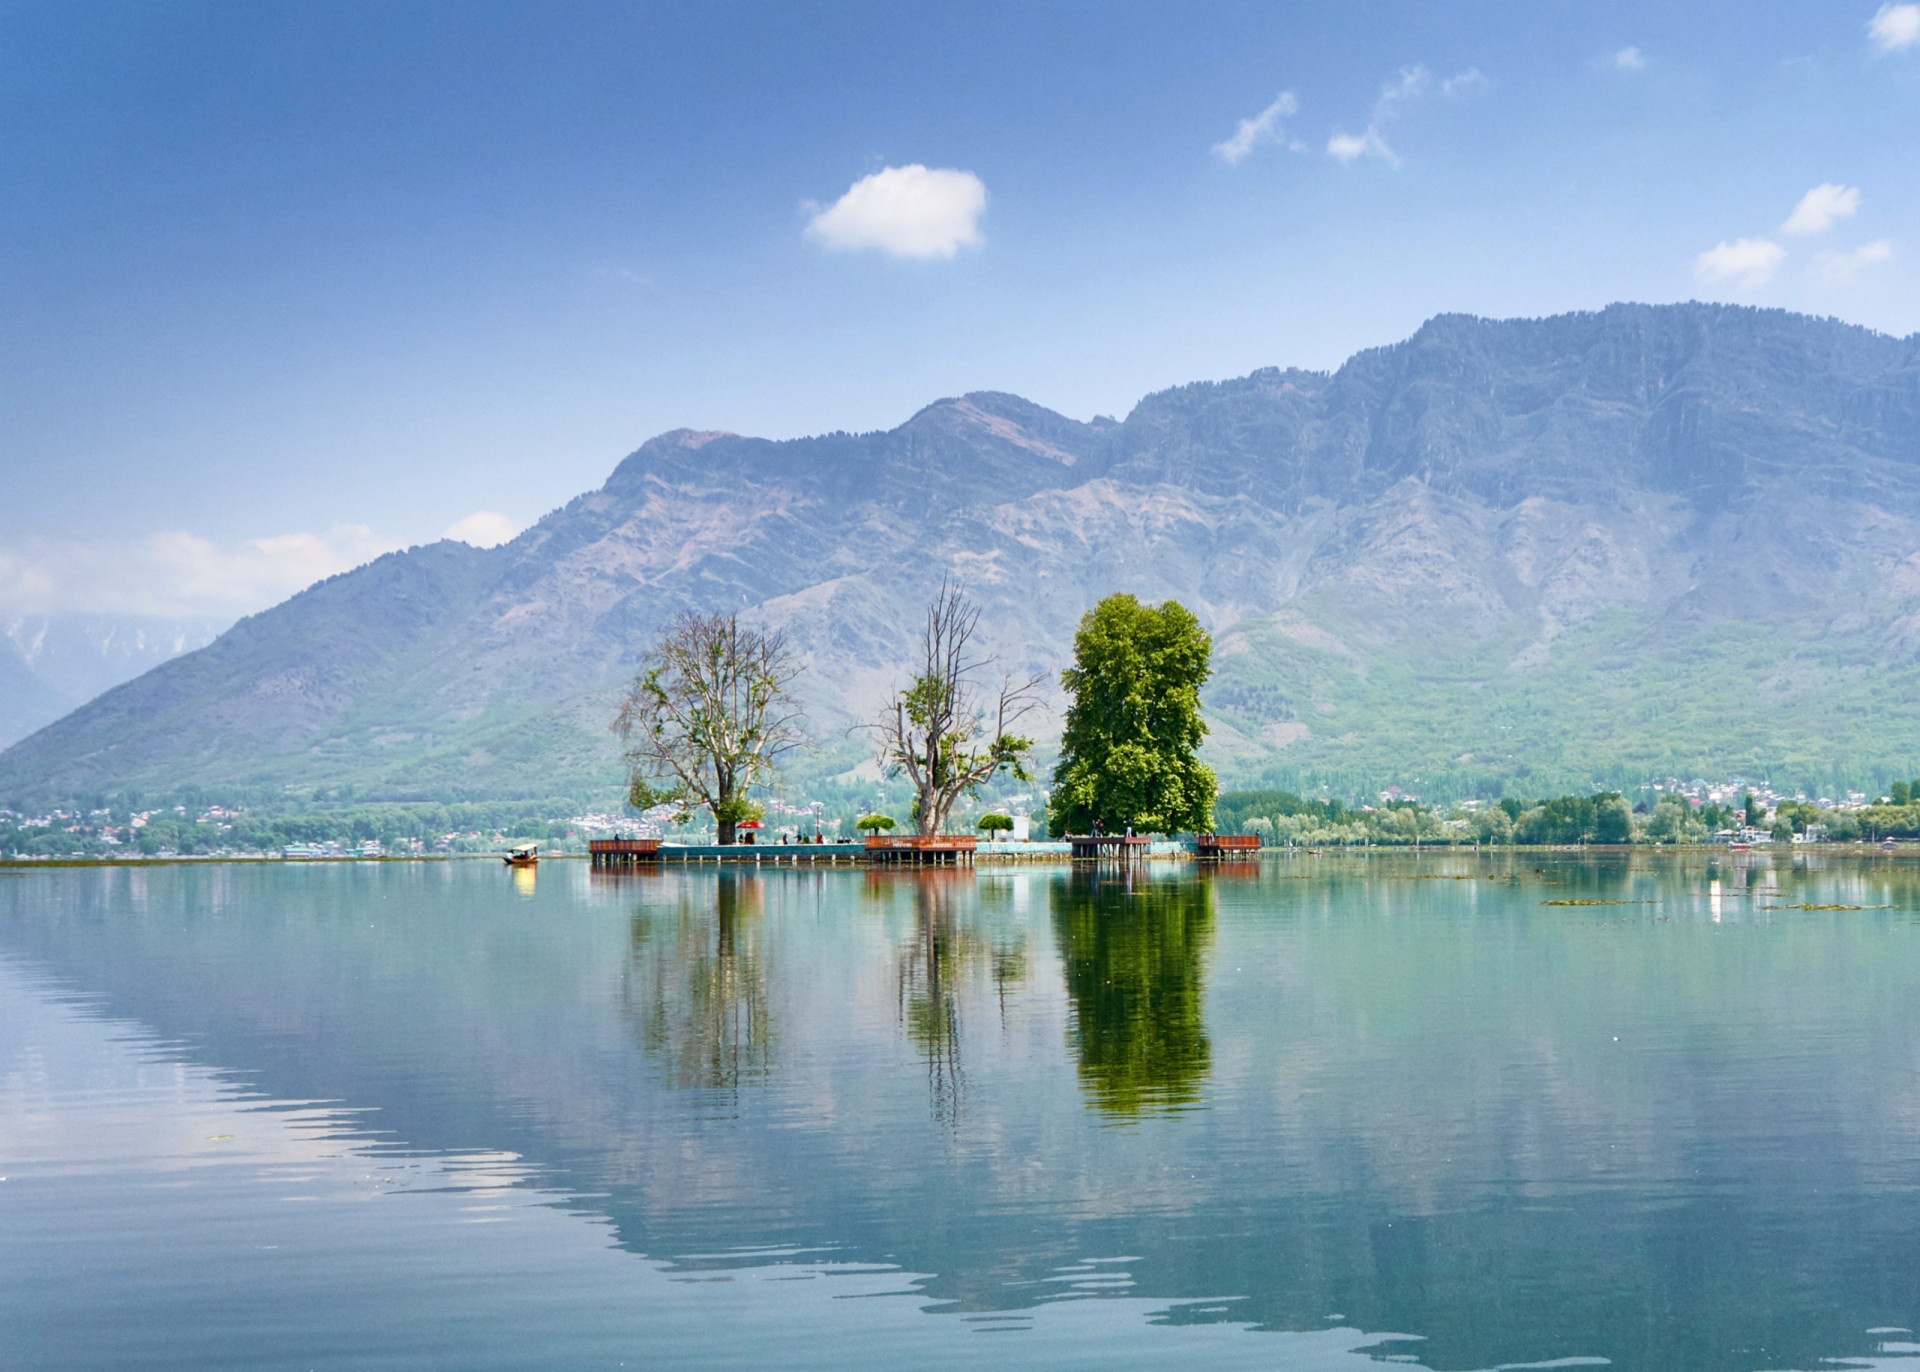 <p>Enchanting Char Chinar is an island in Dal Lake near Srinagar, in India's Jammu and Kashmir region. It's named as such for the majestic Chinar trees set at the four corners of the diminutive island.</p><p>You may also like:<a href="https://www.starsinsider.com/n/471815?utm_source=msn.com&utm_medium=display&utm_campaign=referral_description&utm_content=689154en-my"> Mind-blowing details of the Britney Spears conservatorship case</a></p>